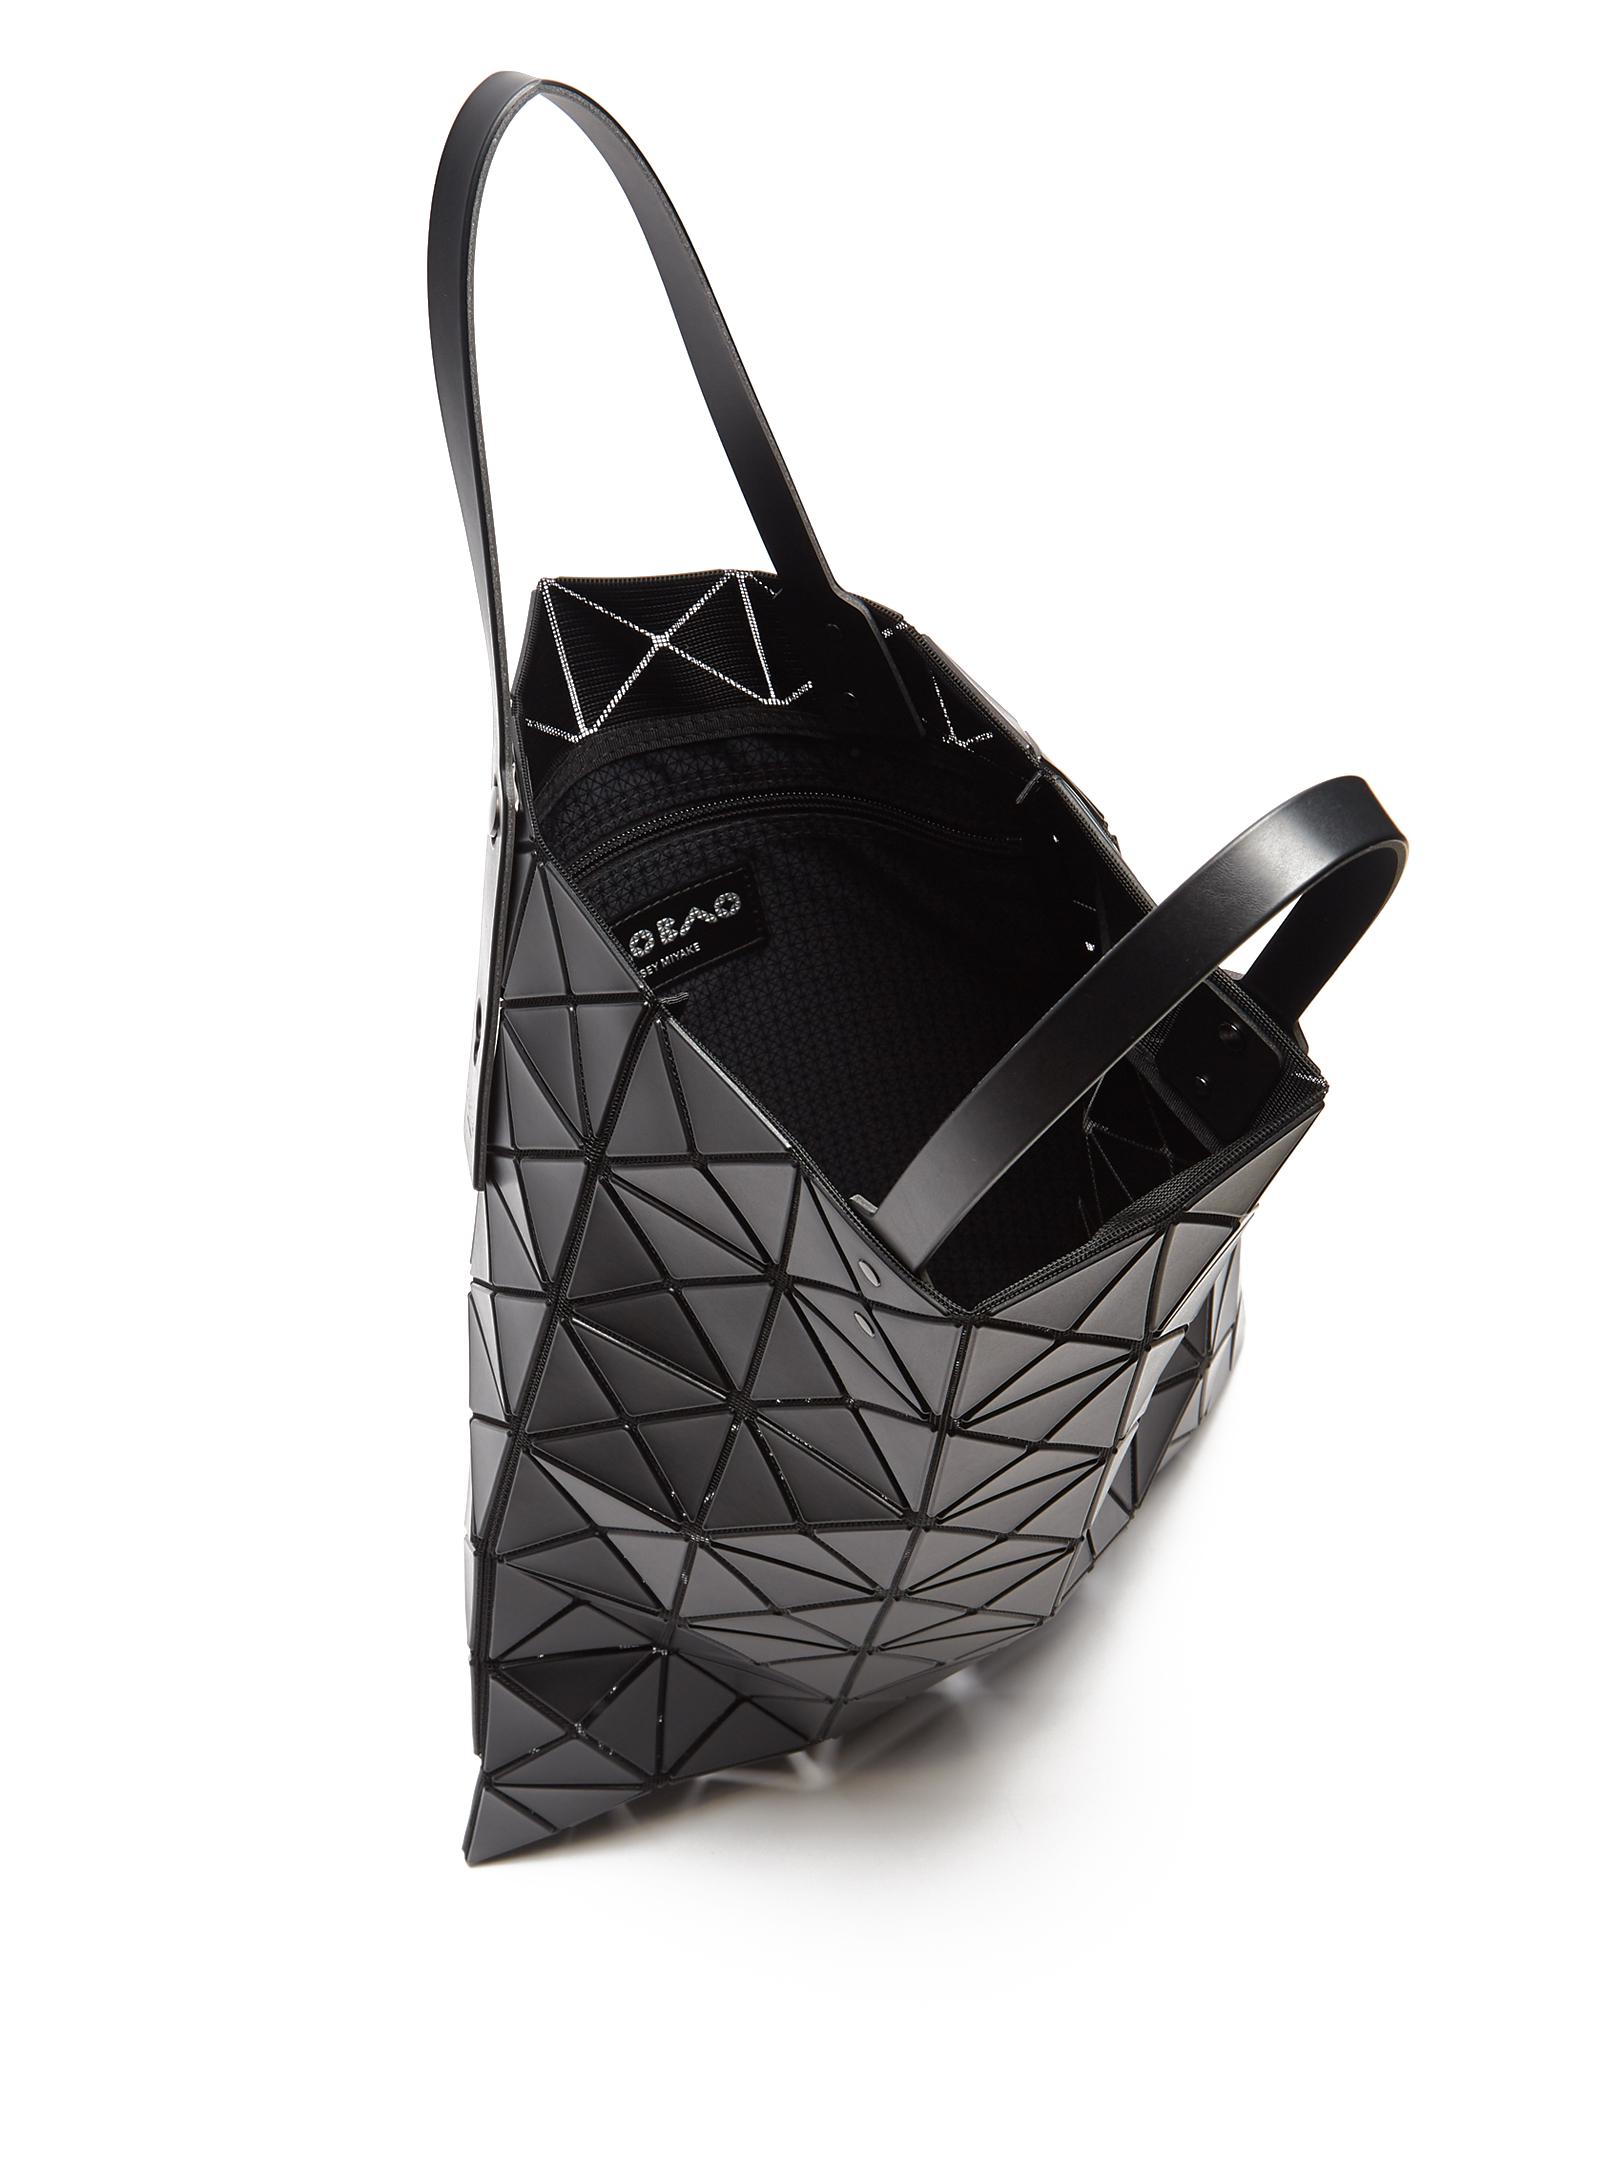 Bao Bao Issey Miyake Lucent Matte Tote in Black | Lyst